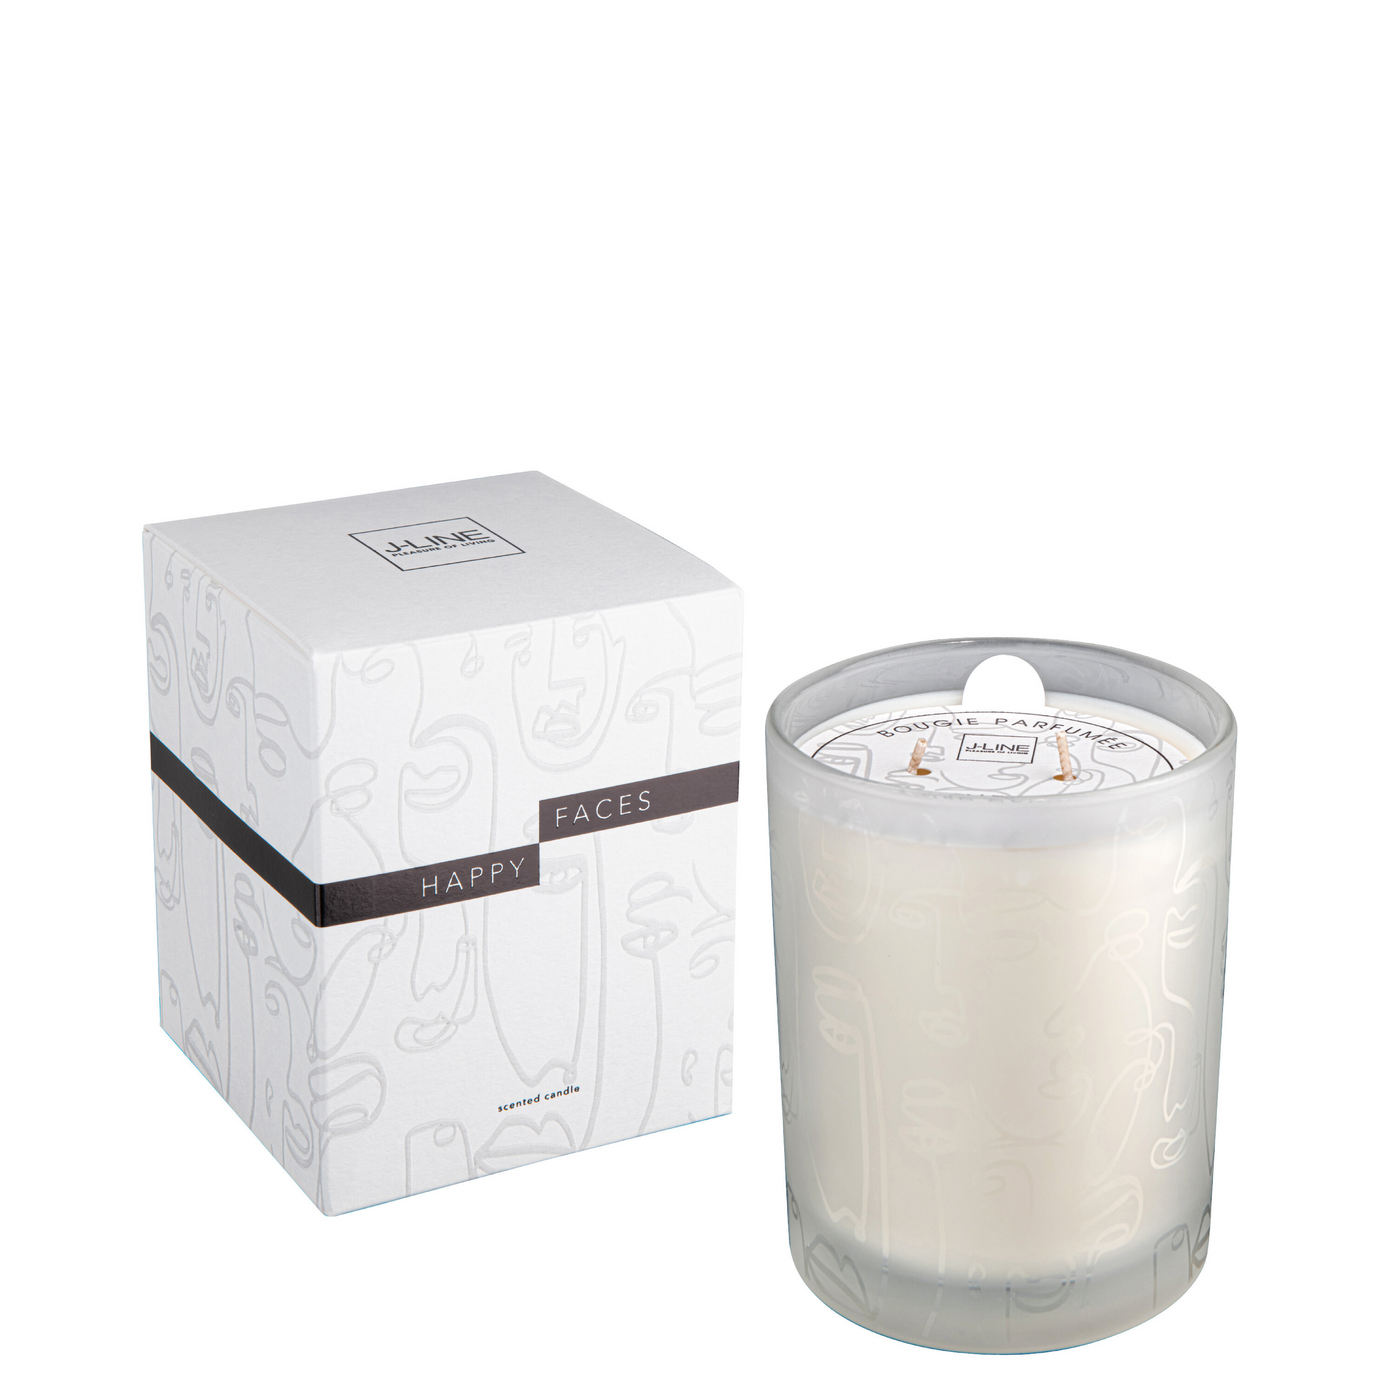 SCENTED CANDLE HAPPY FACES WHITE LARGE-70U